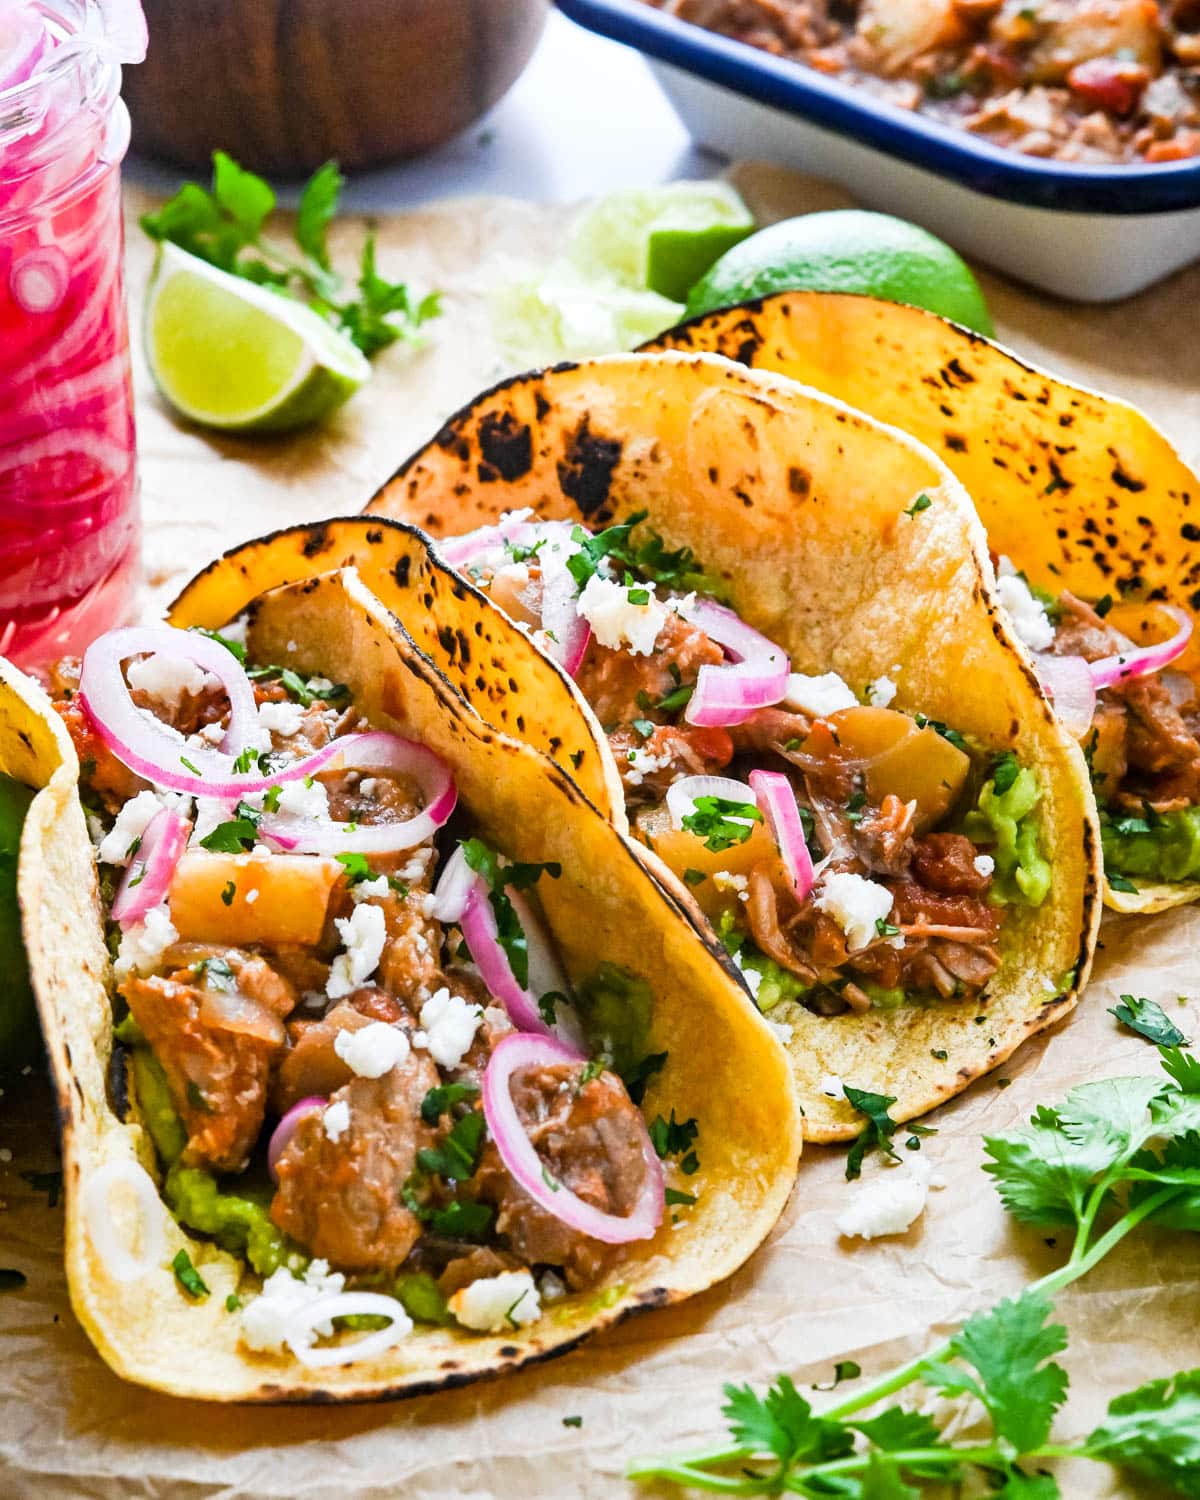 Tinga-style pork tacos with pickled red onions, and limes in the background.